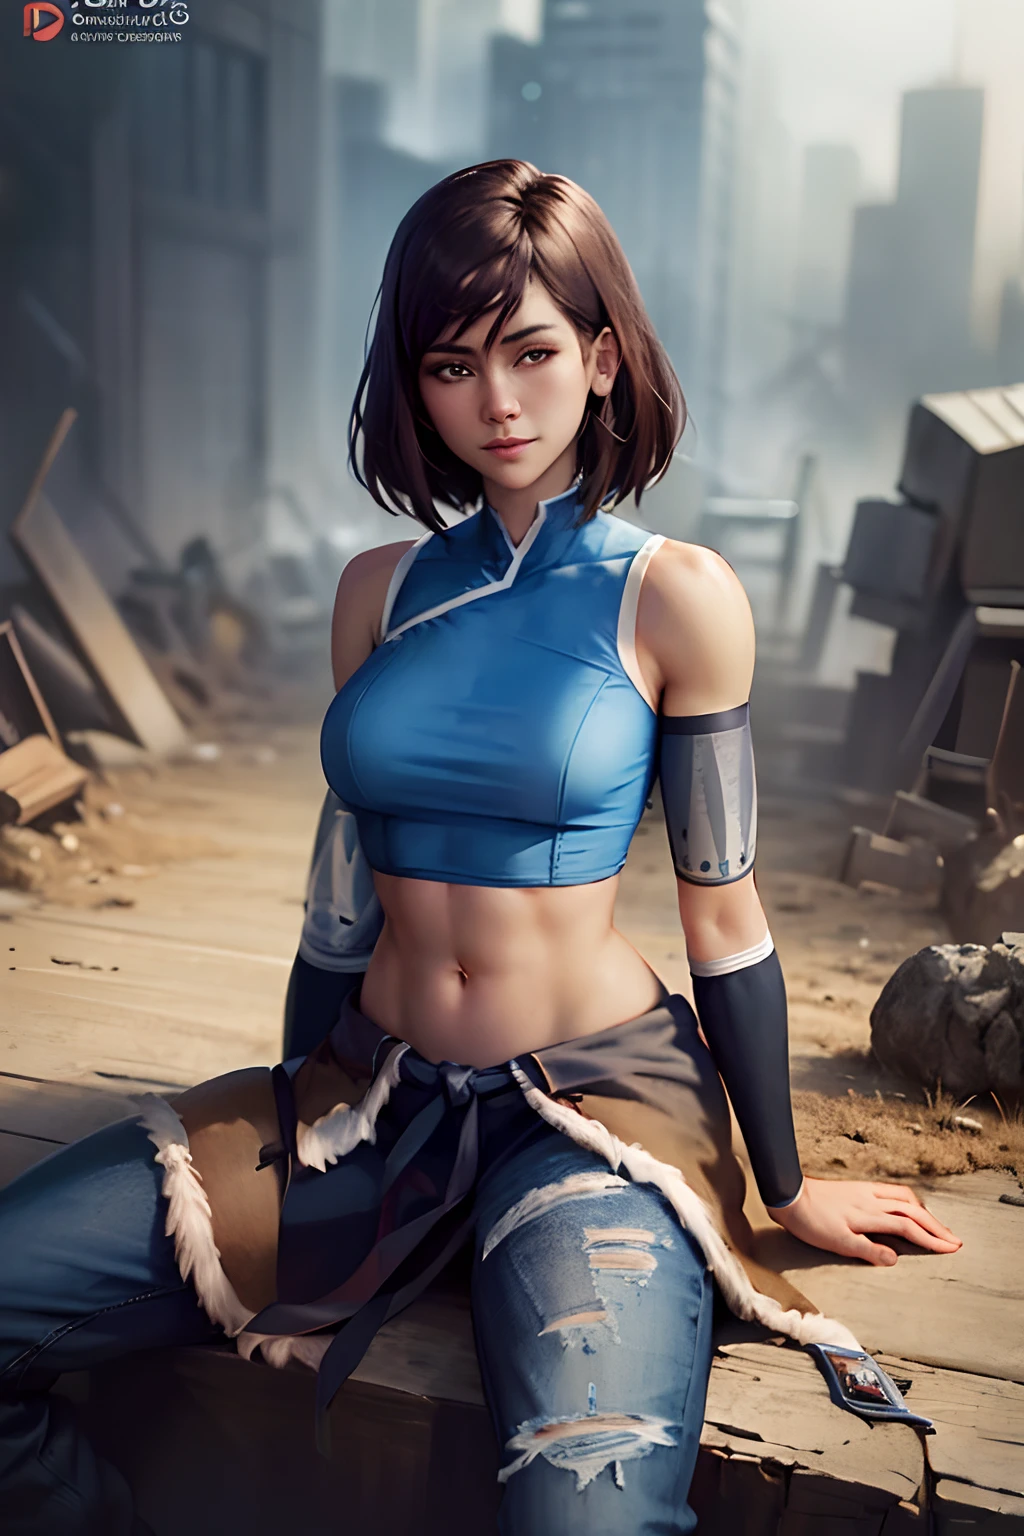 Korra, sitting on some stairs, ripped jeans, tank top, ((pulls up her shirt)) , slightly muscular, Beautiful anime waifu style girl, hyperdetailed painting, luminism, art by Carne Griffiths and Wadim Kashin concept art,  post-apocalyptic background, abstract beauty, approaching perfection, pure form, golden ratio, minimalistic, dark atmosphere, unfinished, concept art, intricate details, 8k post production, high resolution, hyperdetailed, trending on artstation, sharp focus, studio photo, intricate details, highly detailed, by Jon Bauer